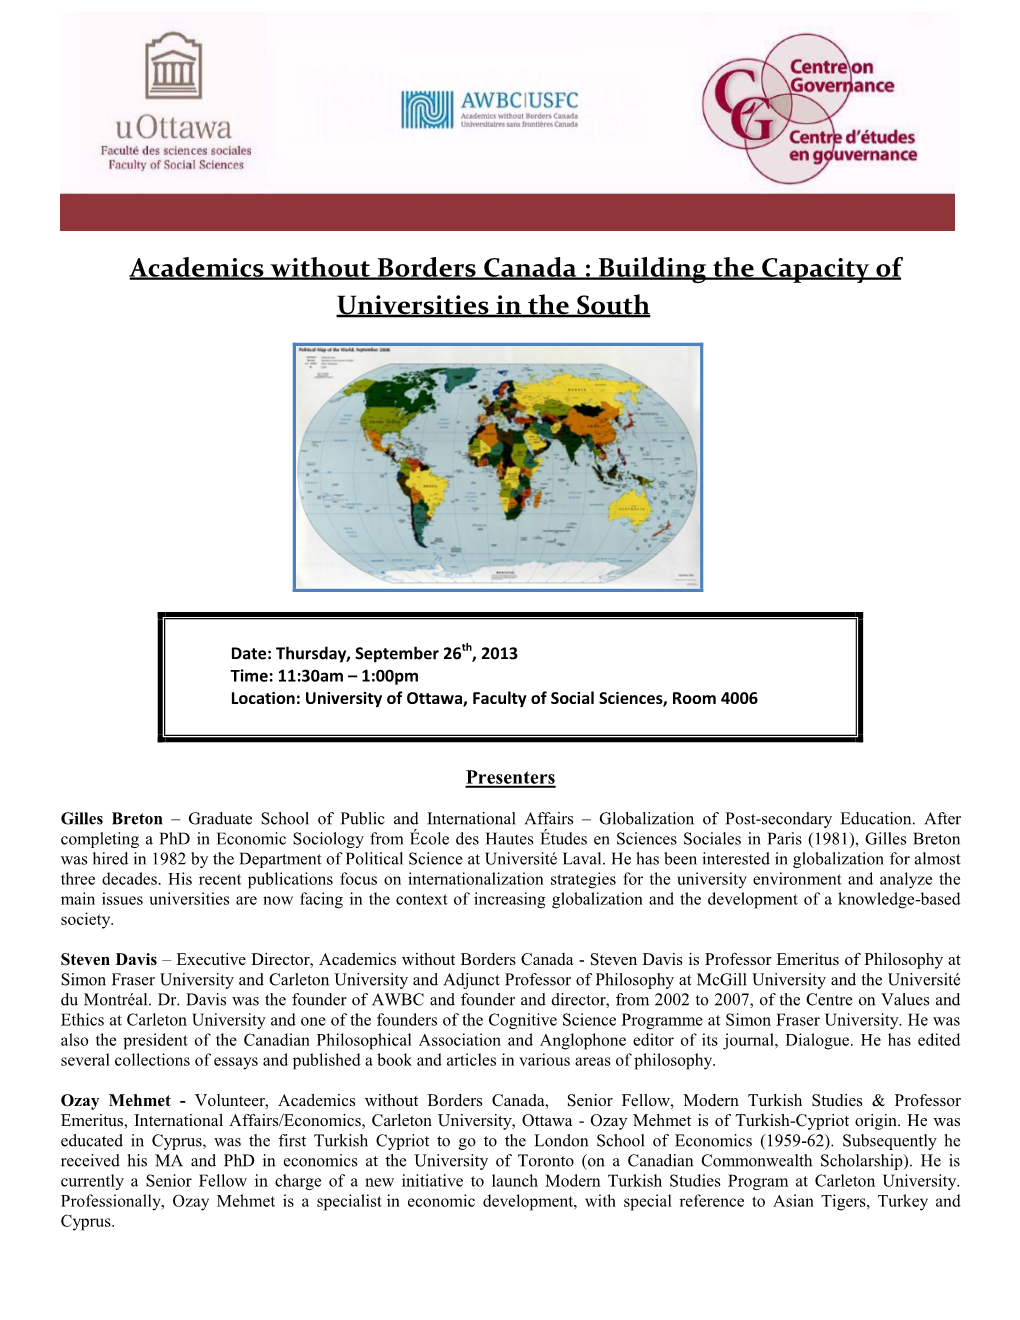 Academics Without Borders Canada : Building the Capacity of Universities in the South